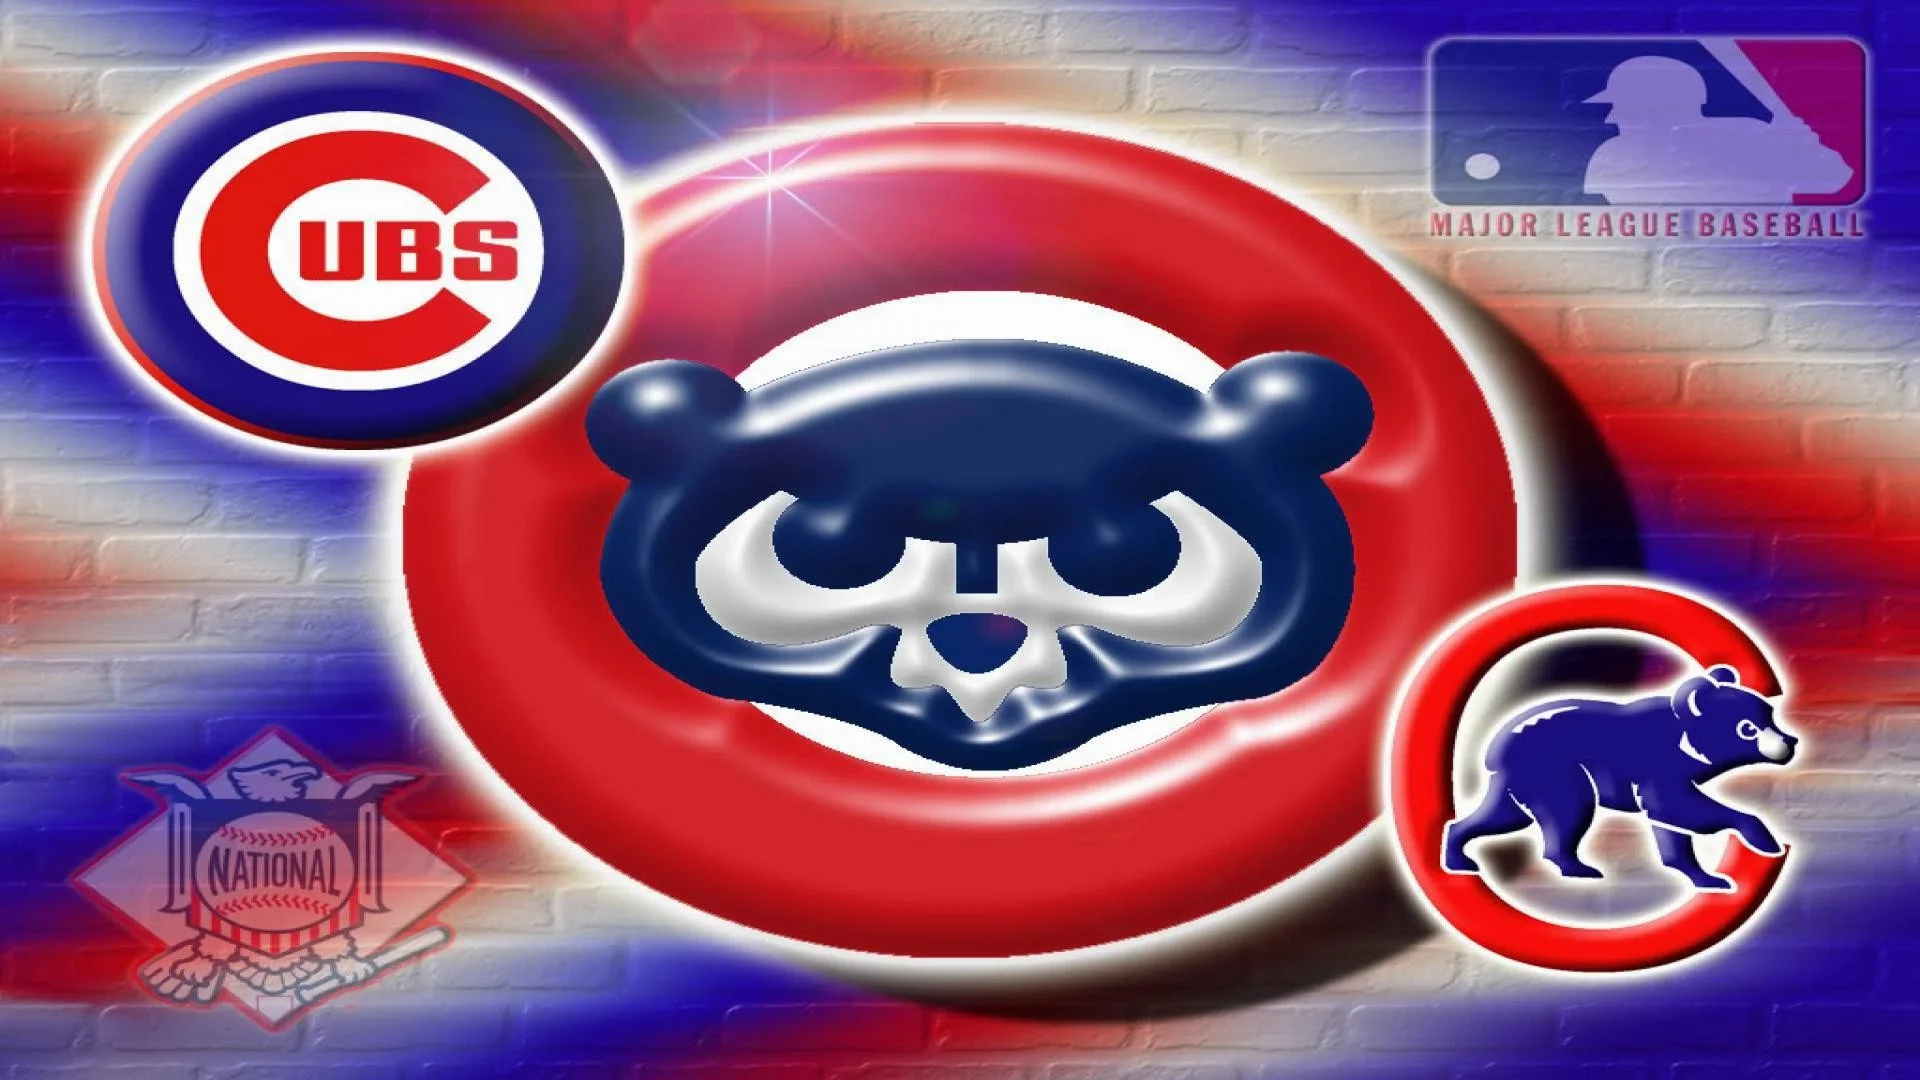 Download wallpapers Chicago Cubs logo American baseball club metal  emblem red blue metal mesh background Chicago Cubs MLB Chicago  Illinois USA baseball for desktop with resolution 2880x1800 High Quality  HD pictures wallpapers